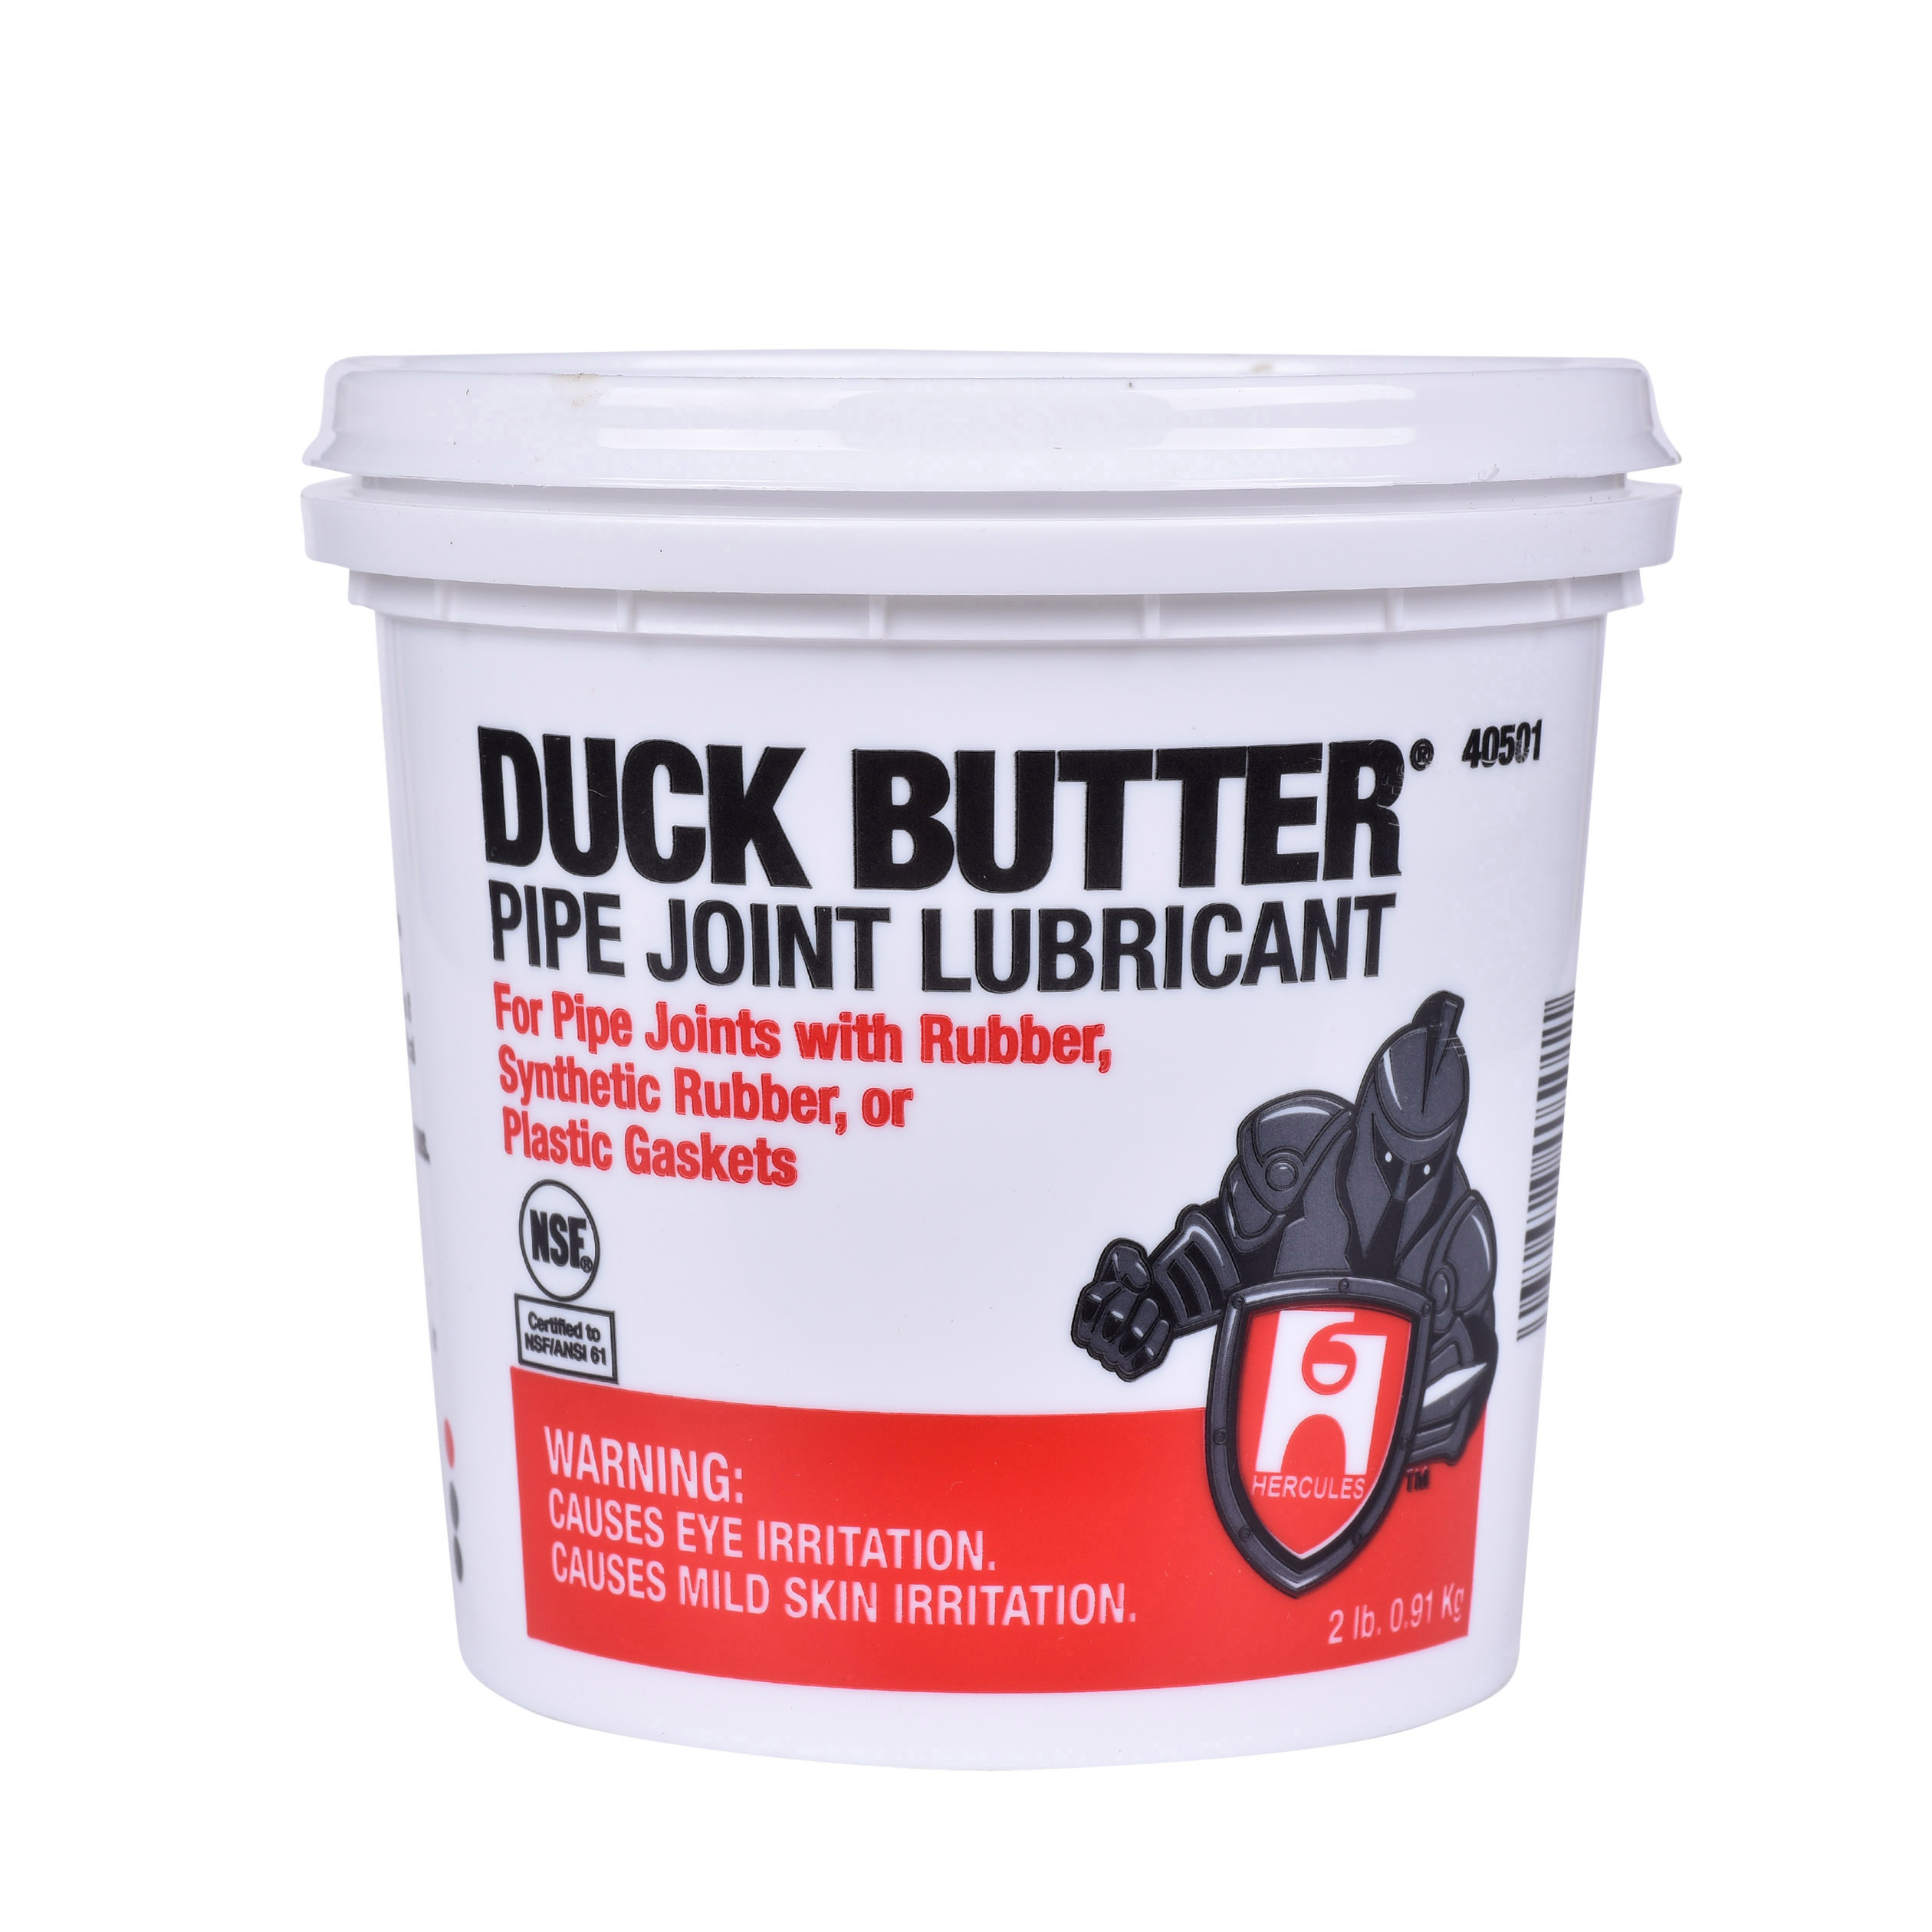 P18-0125 - Duck Butter ® Pipe Joint Lubricant.